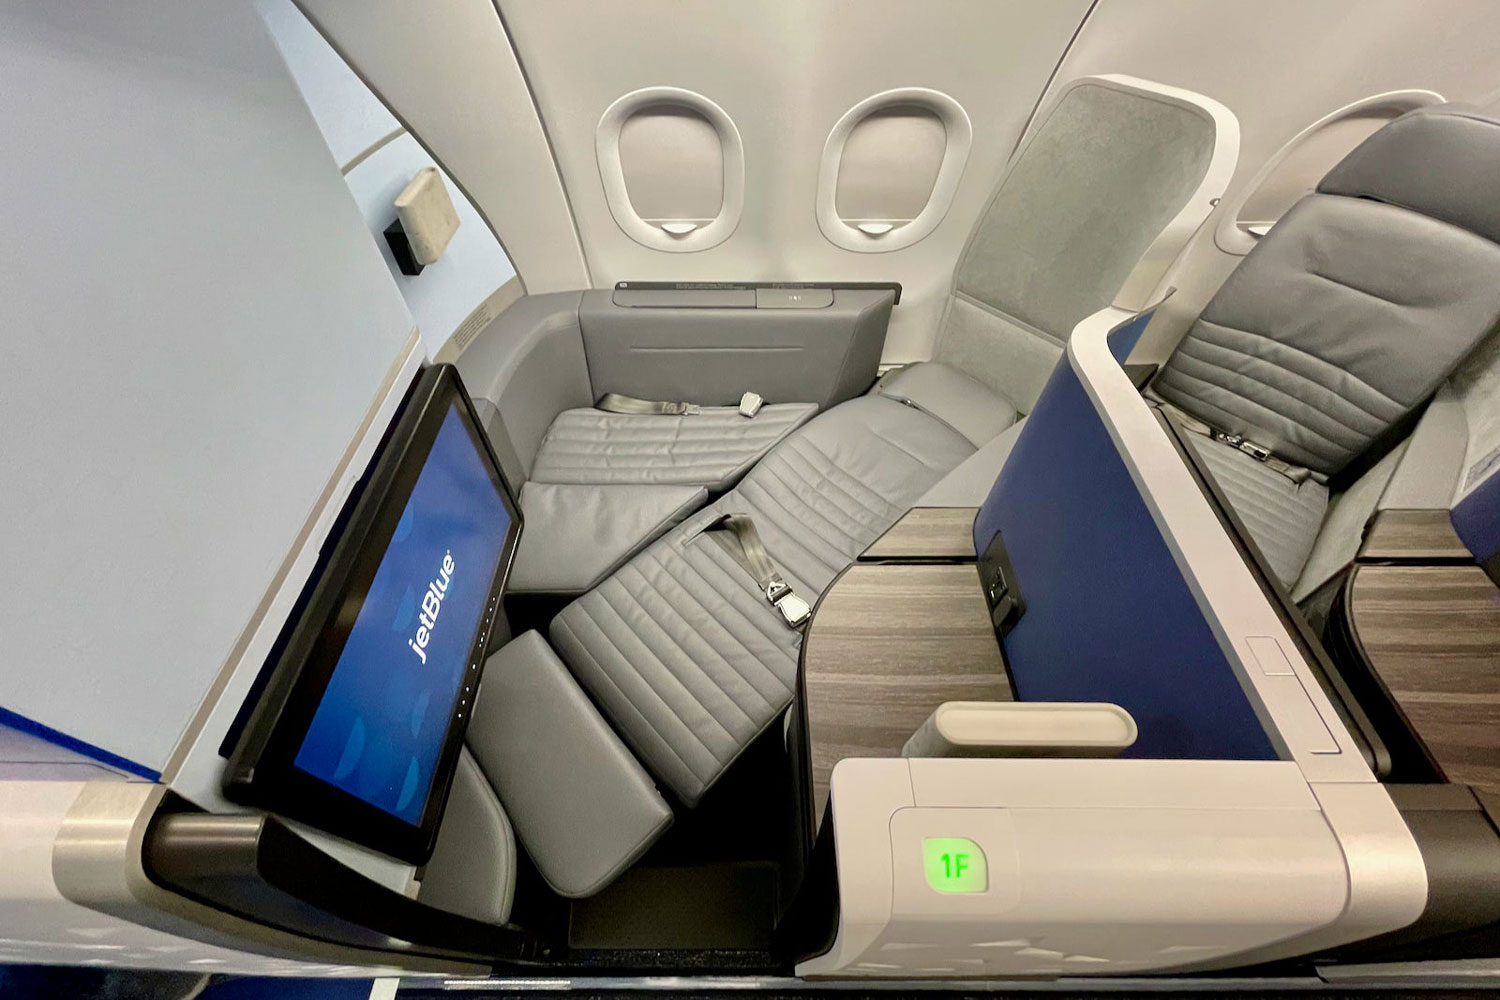 The ‘Secret’ First Class Seats Most Passengers Don’t Know About